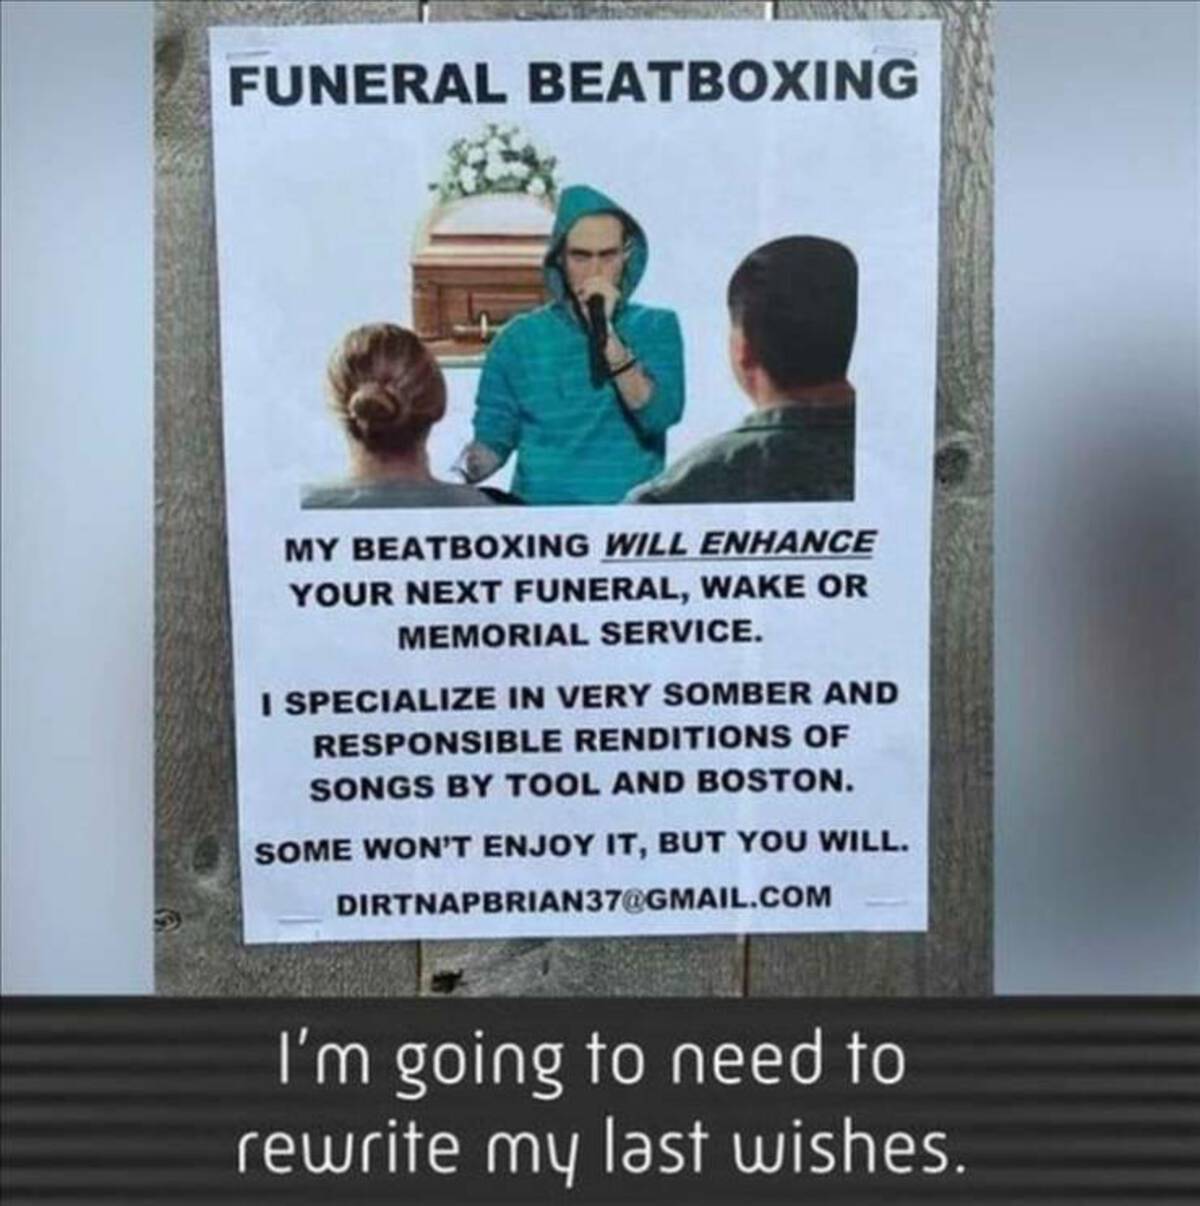 twitter dnd memes - Funeral Beatboxing My Beatboxing Will Enhance Your Next Funeral, Wake Or Memorial Service. I Specialize In Very Somber And Responsible Renditions Of Songs By Tool And Boston. Some Won'T Enjoy It, But You Will. DIRTNAPBRIAN37.Com I'm go